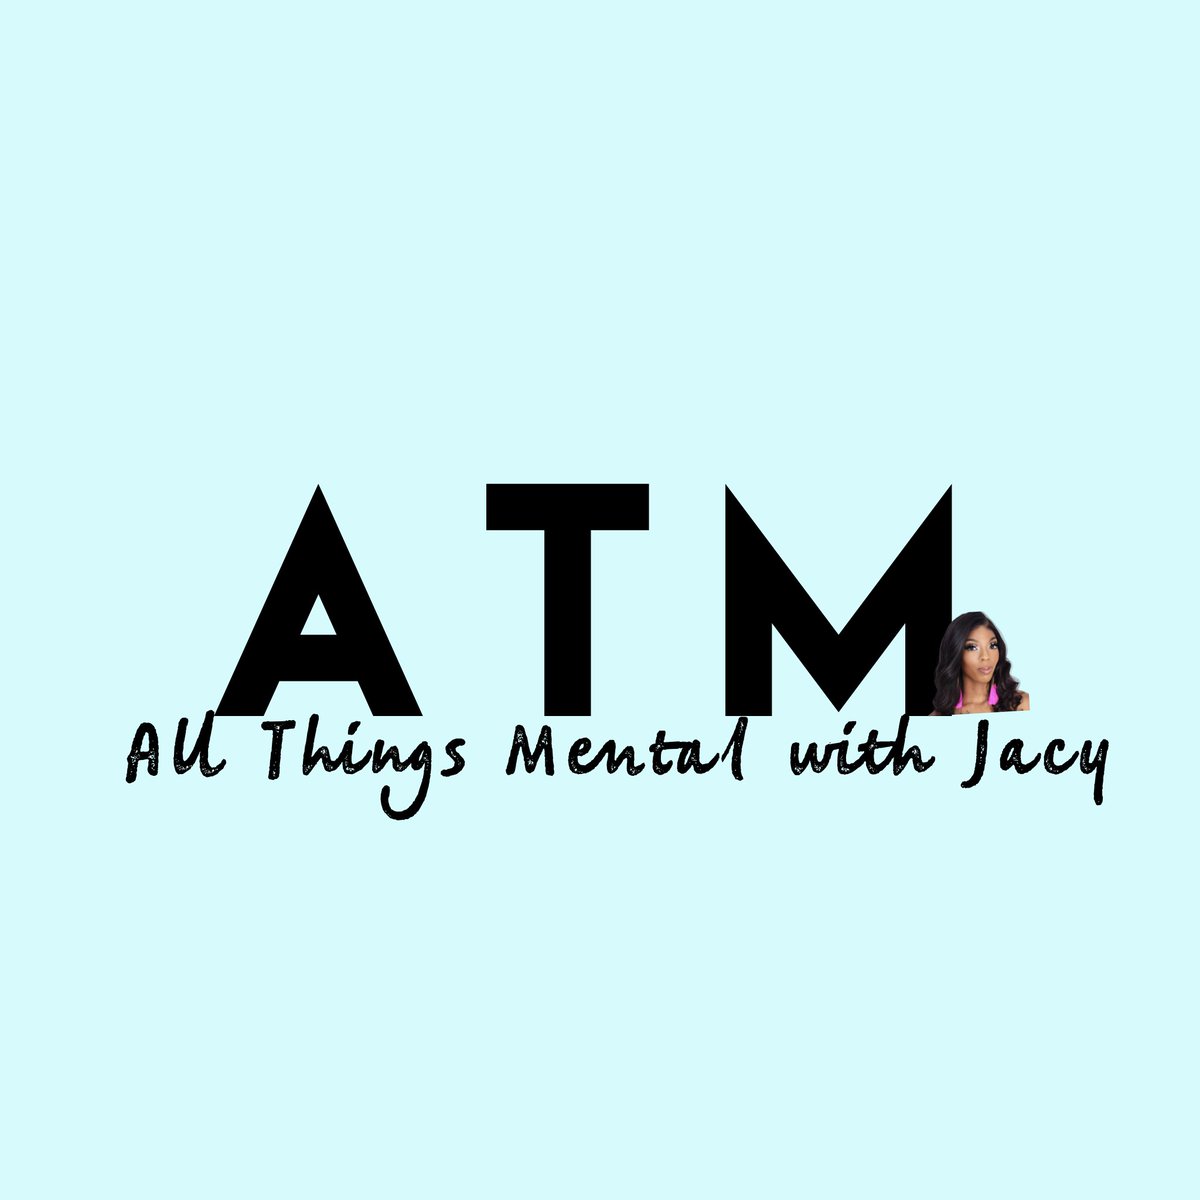 I’ll post all my  #allthingsmentalwithjacy posts under this thread.  The therapist everyone can relate to.